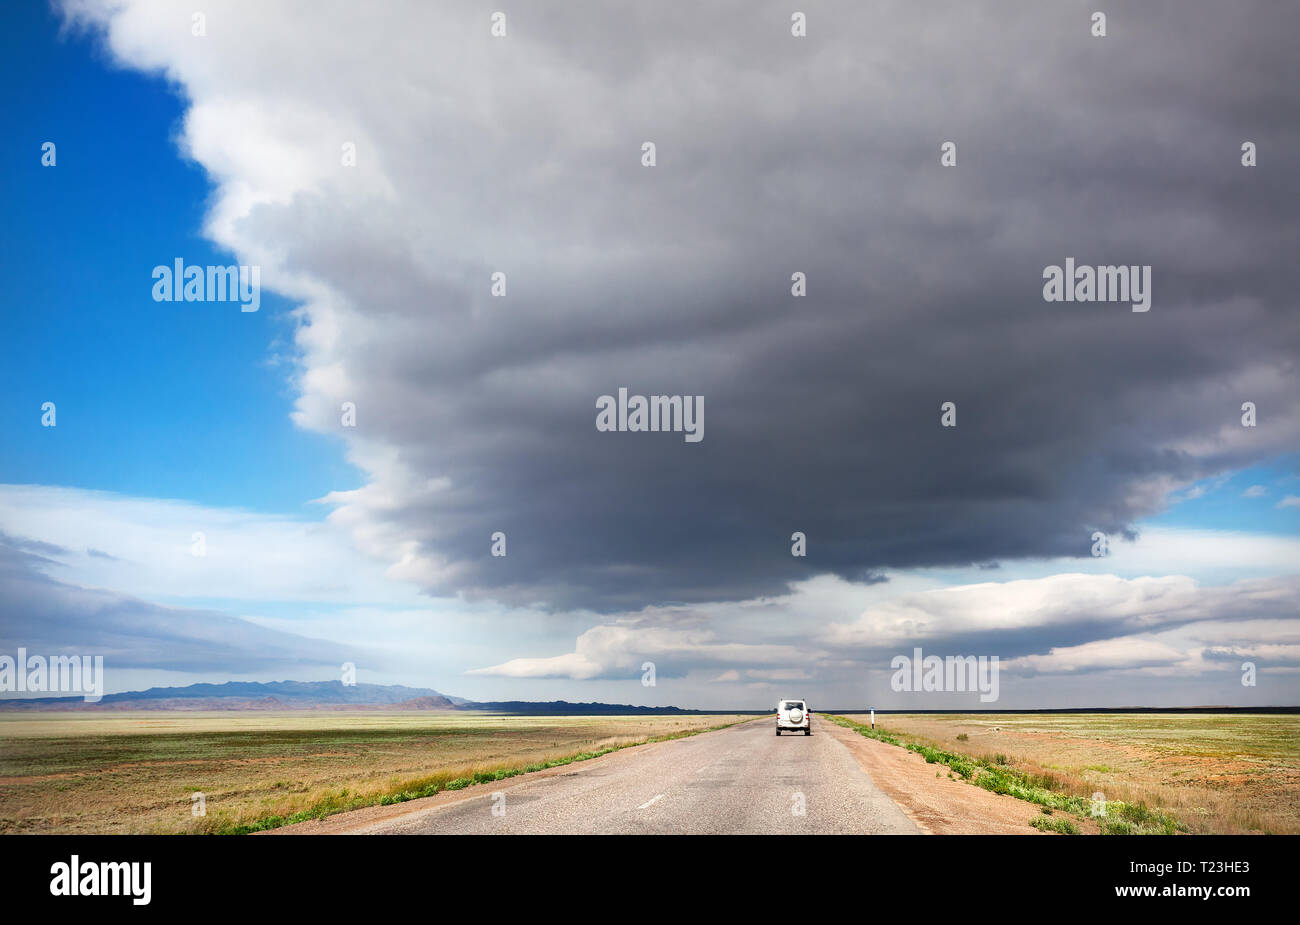 Highway road and lonely car in the desert at overcast sky background Stock Photo